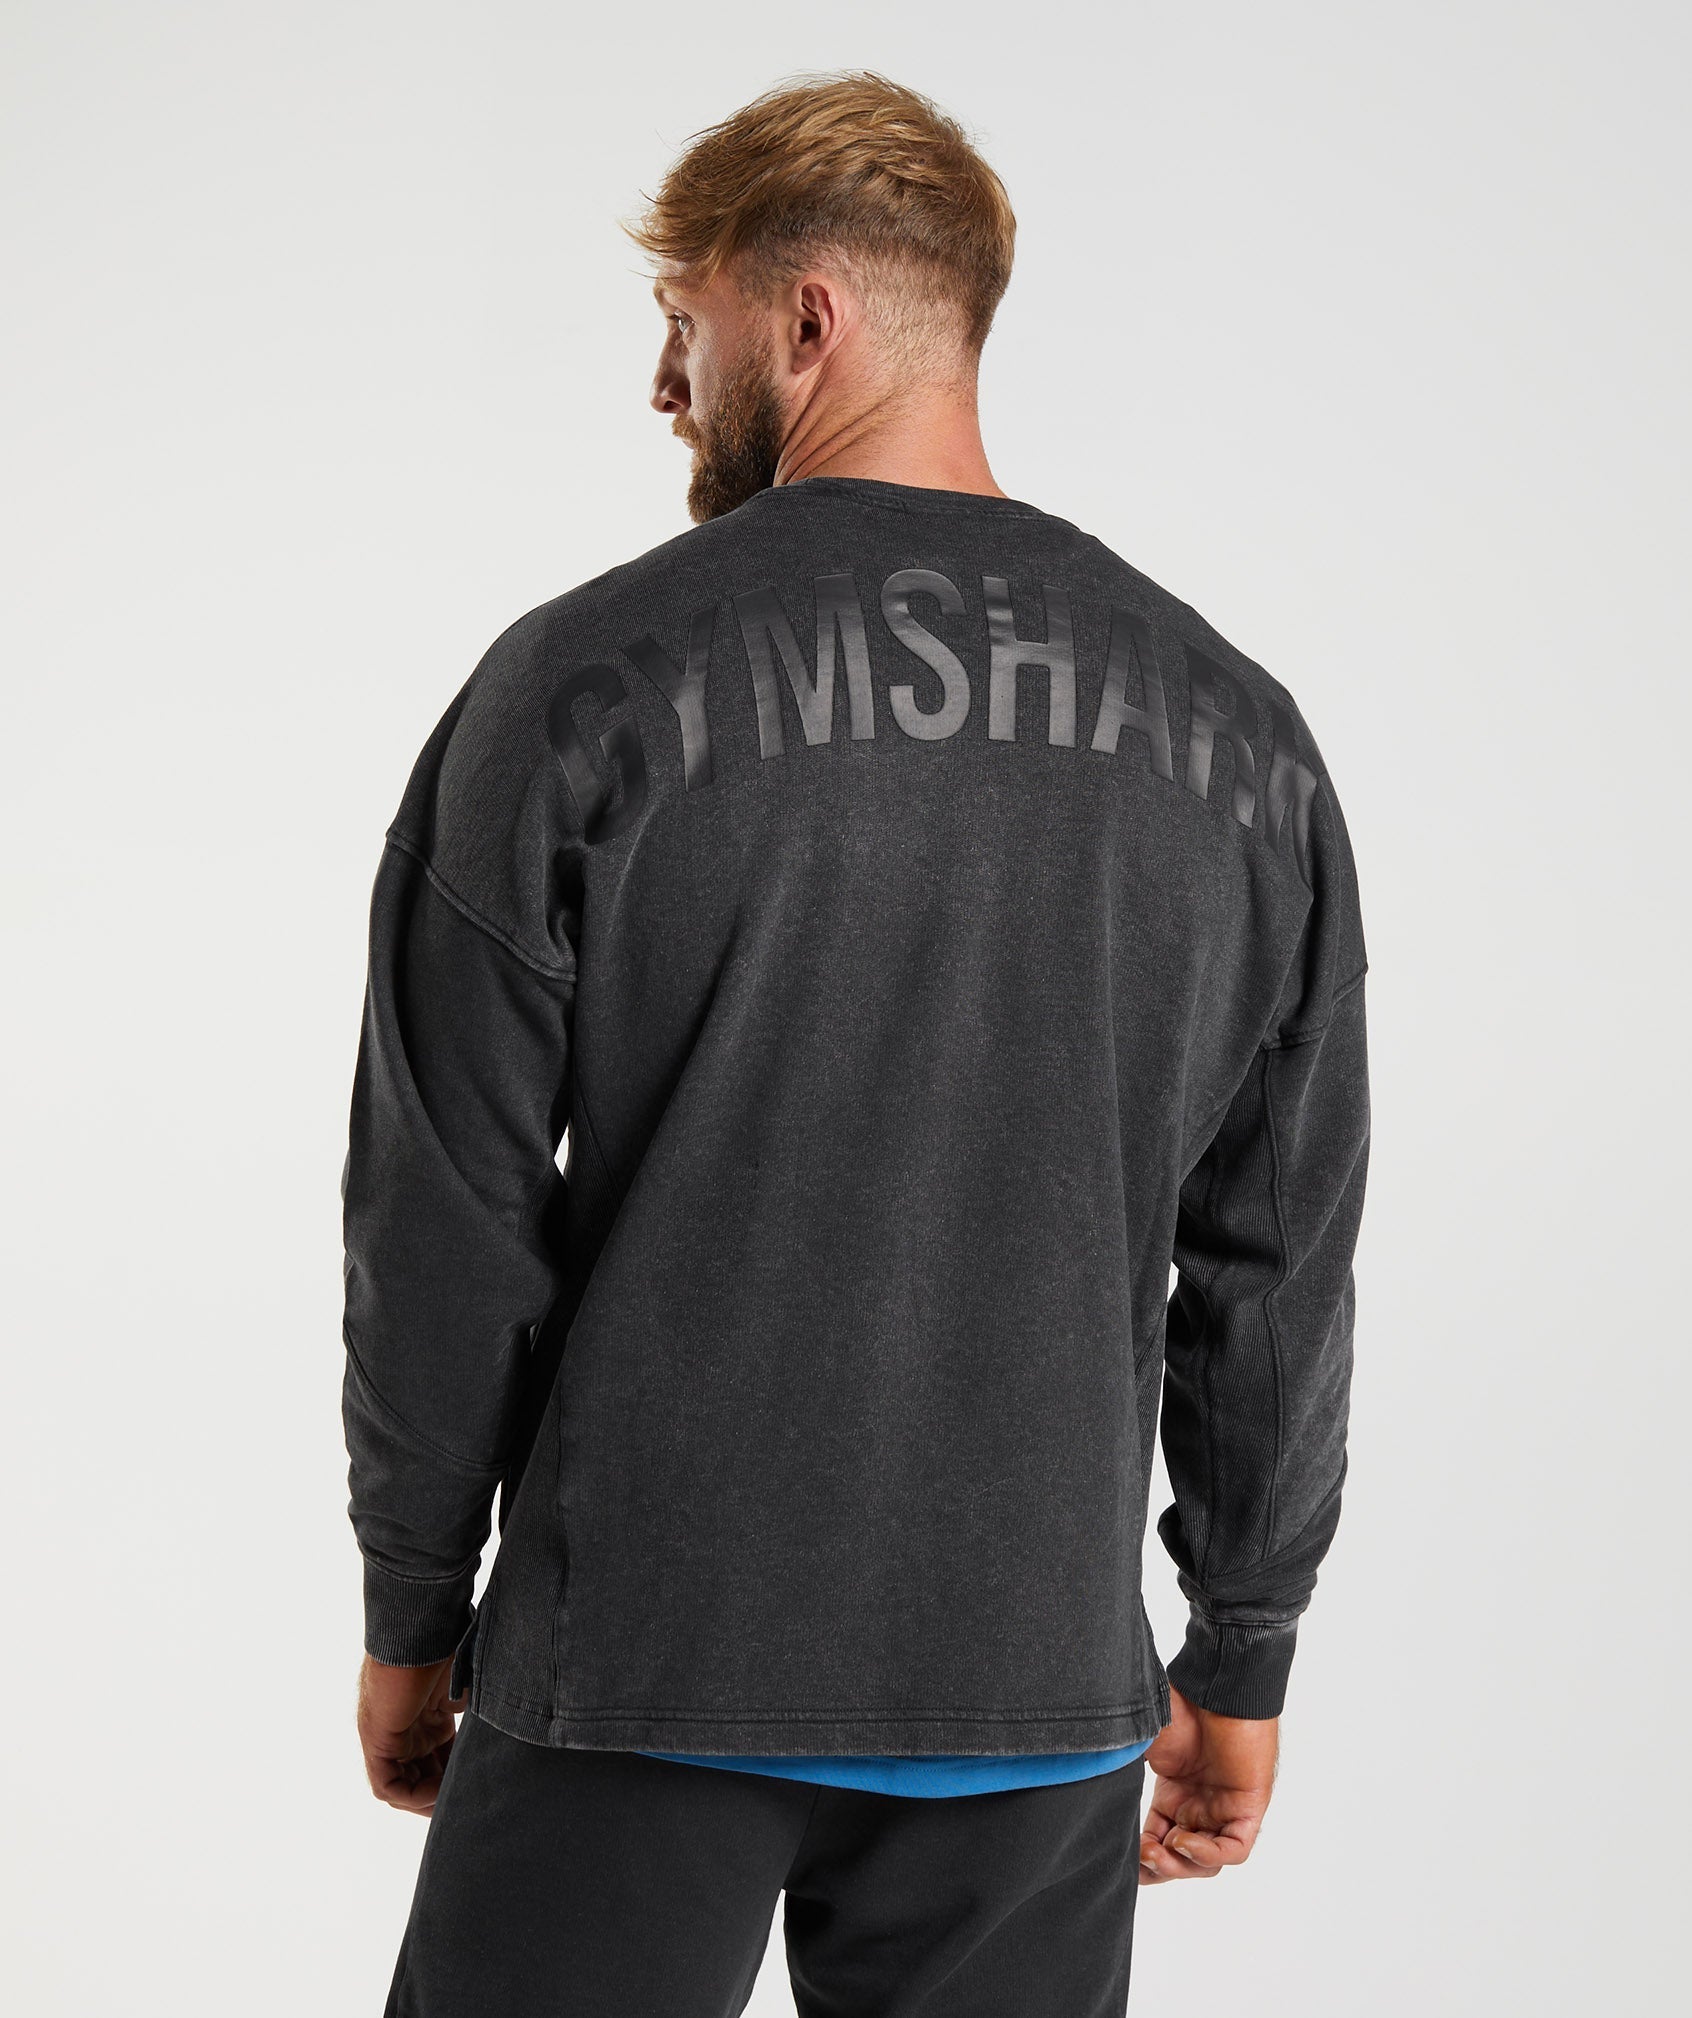 Gymshark Pump Cover Collection C0de BRIAN for 10% off P.S get an